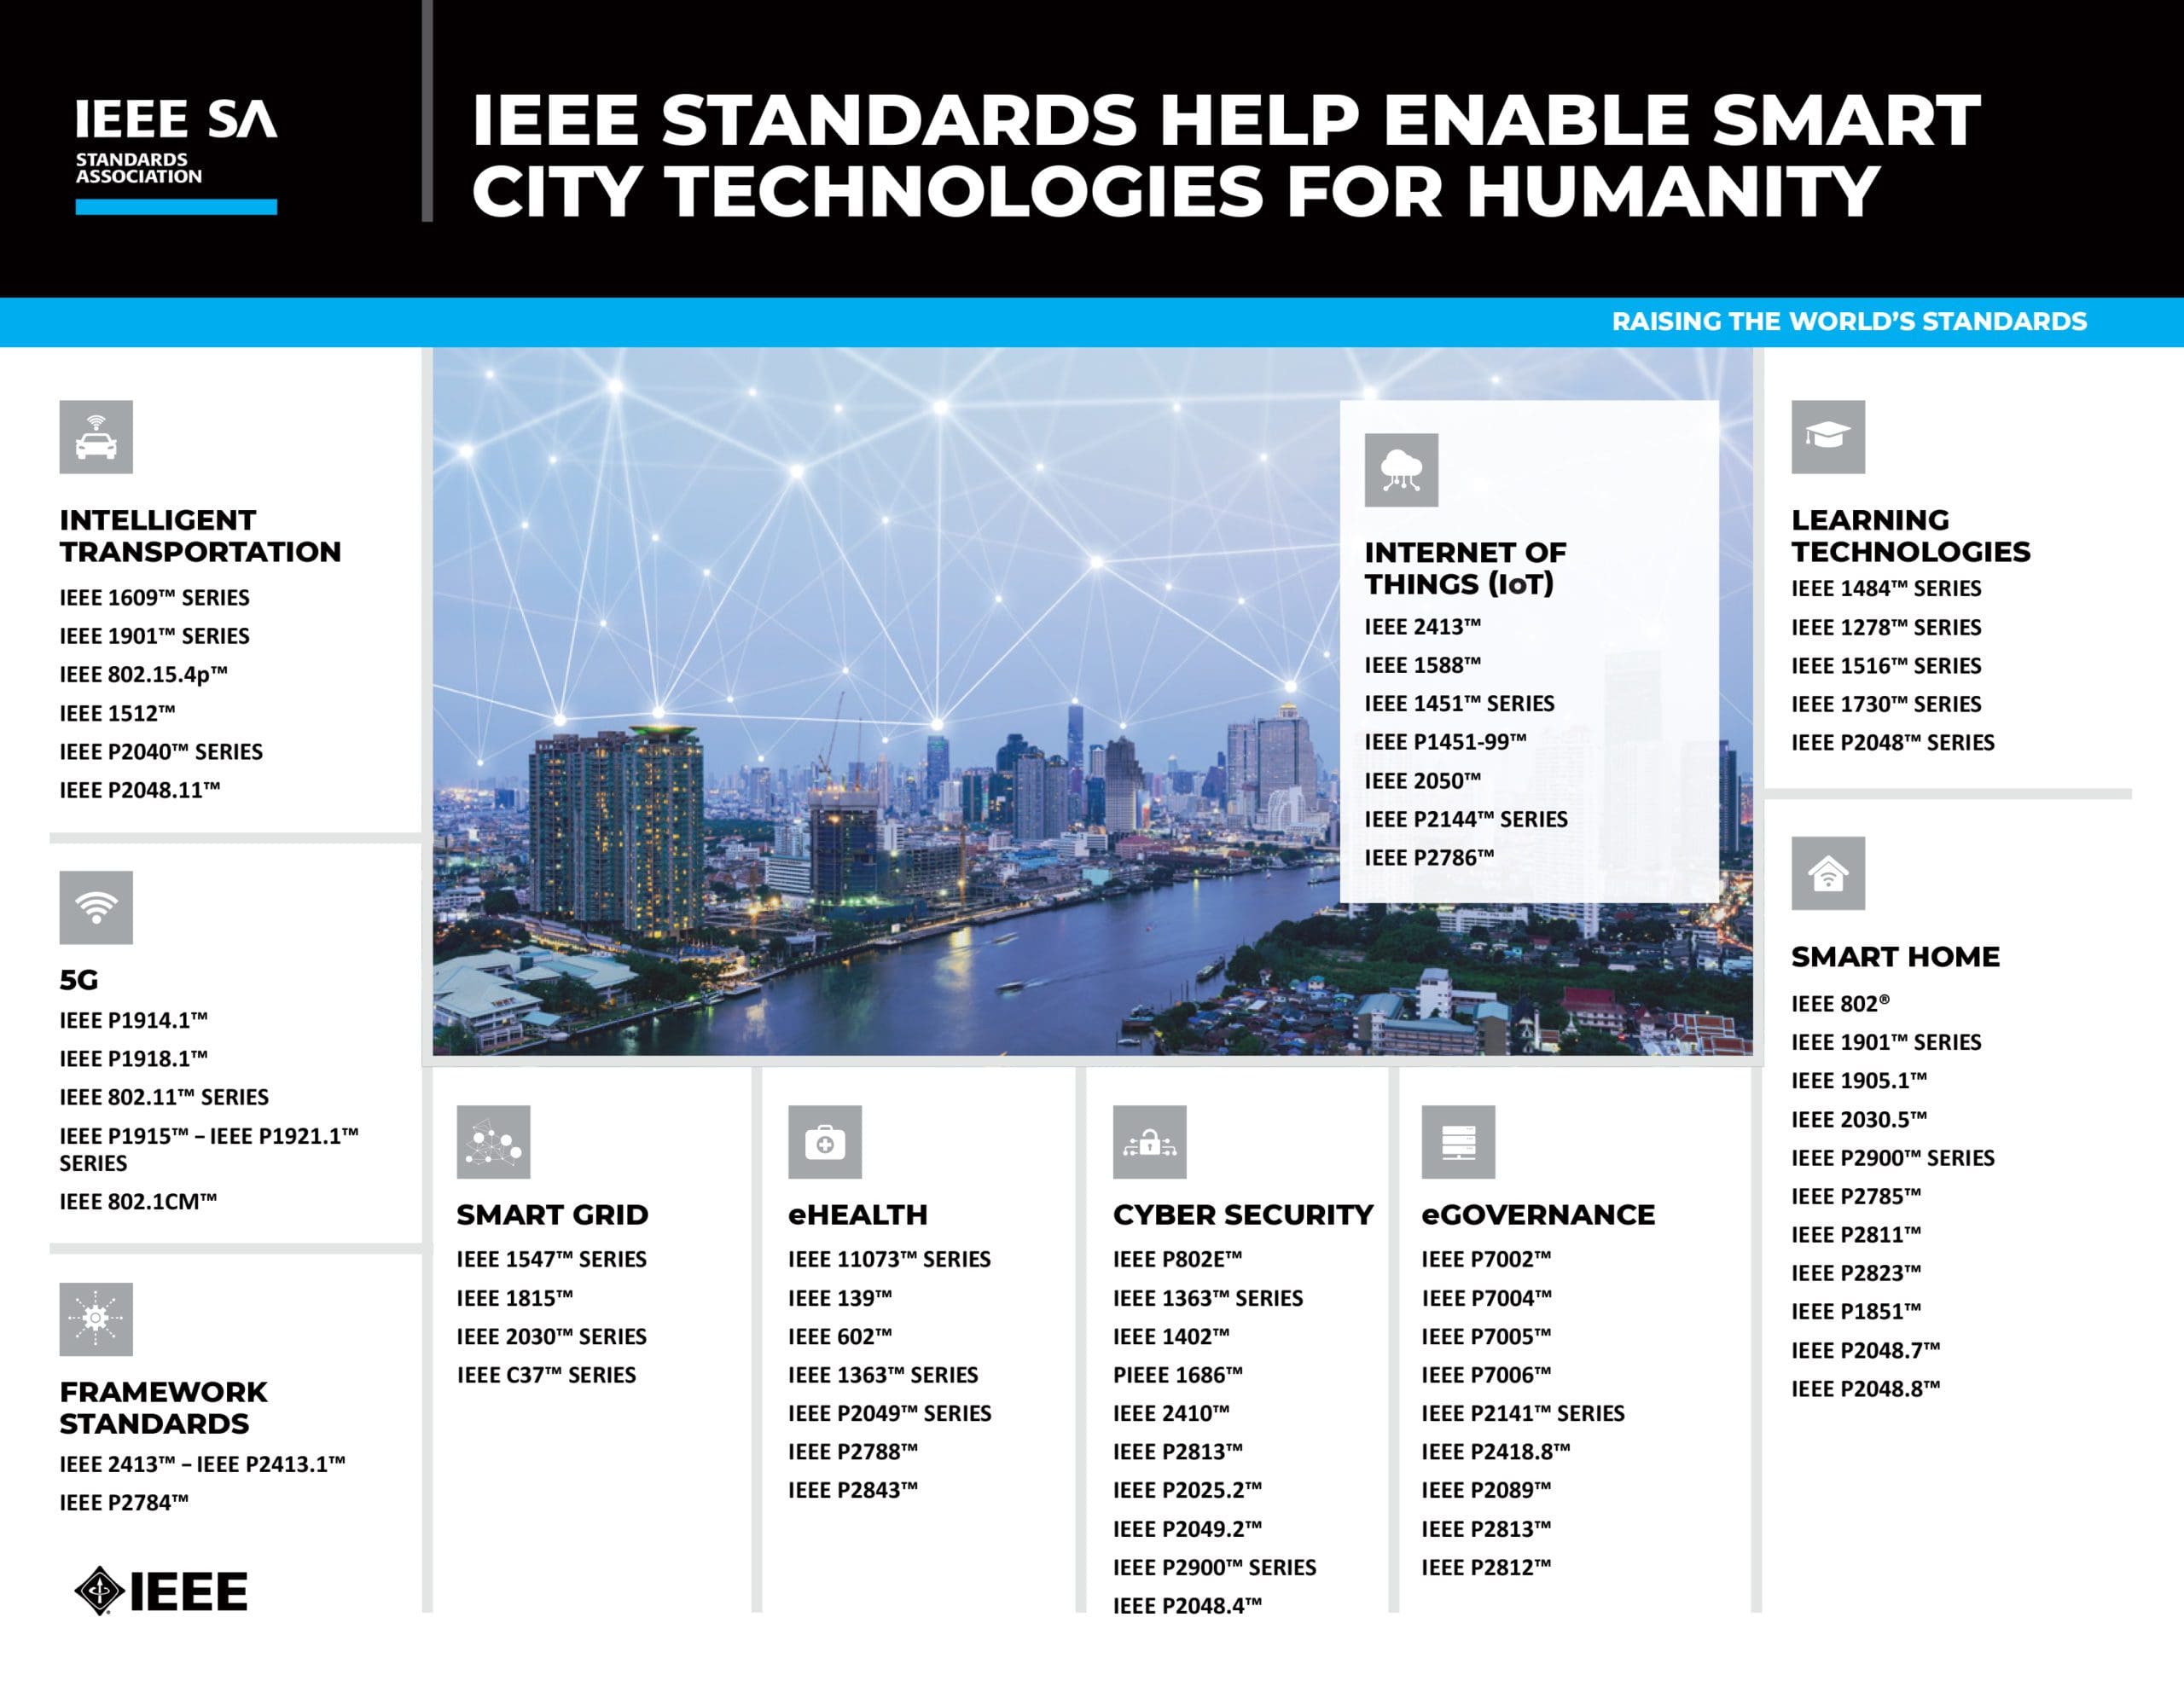 IEEE Standards help enable smart city technologies for humanity